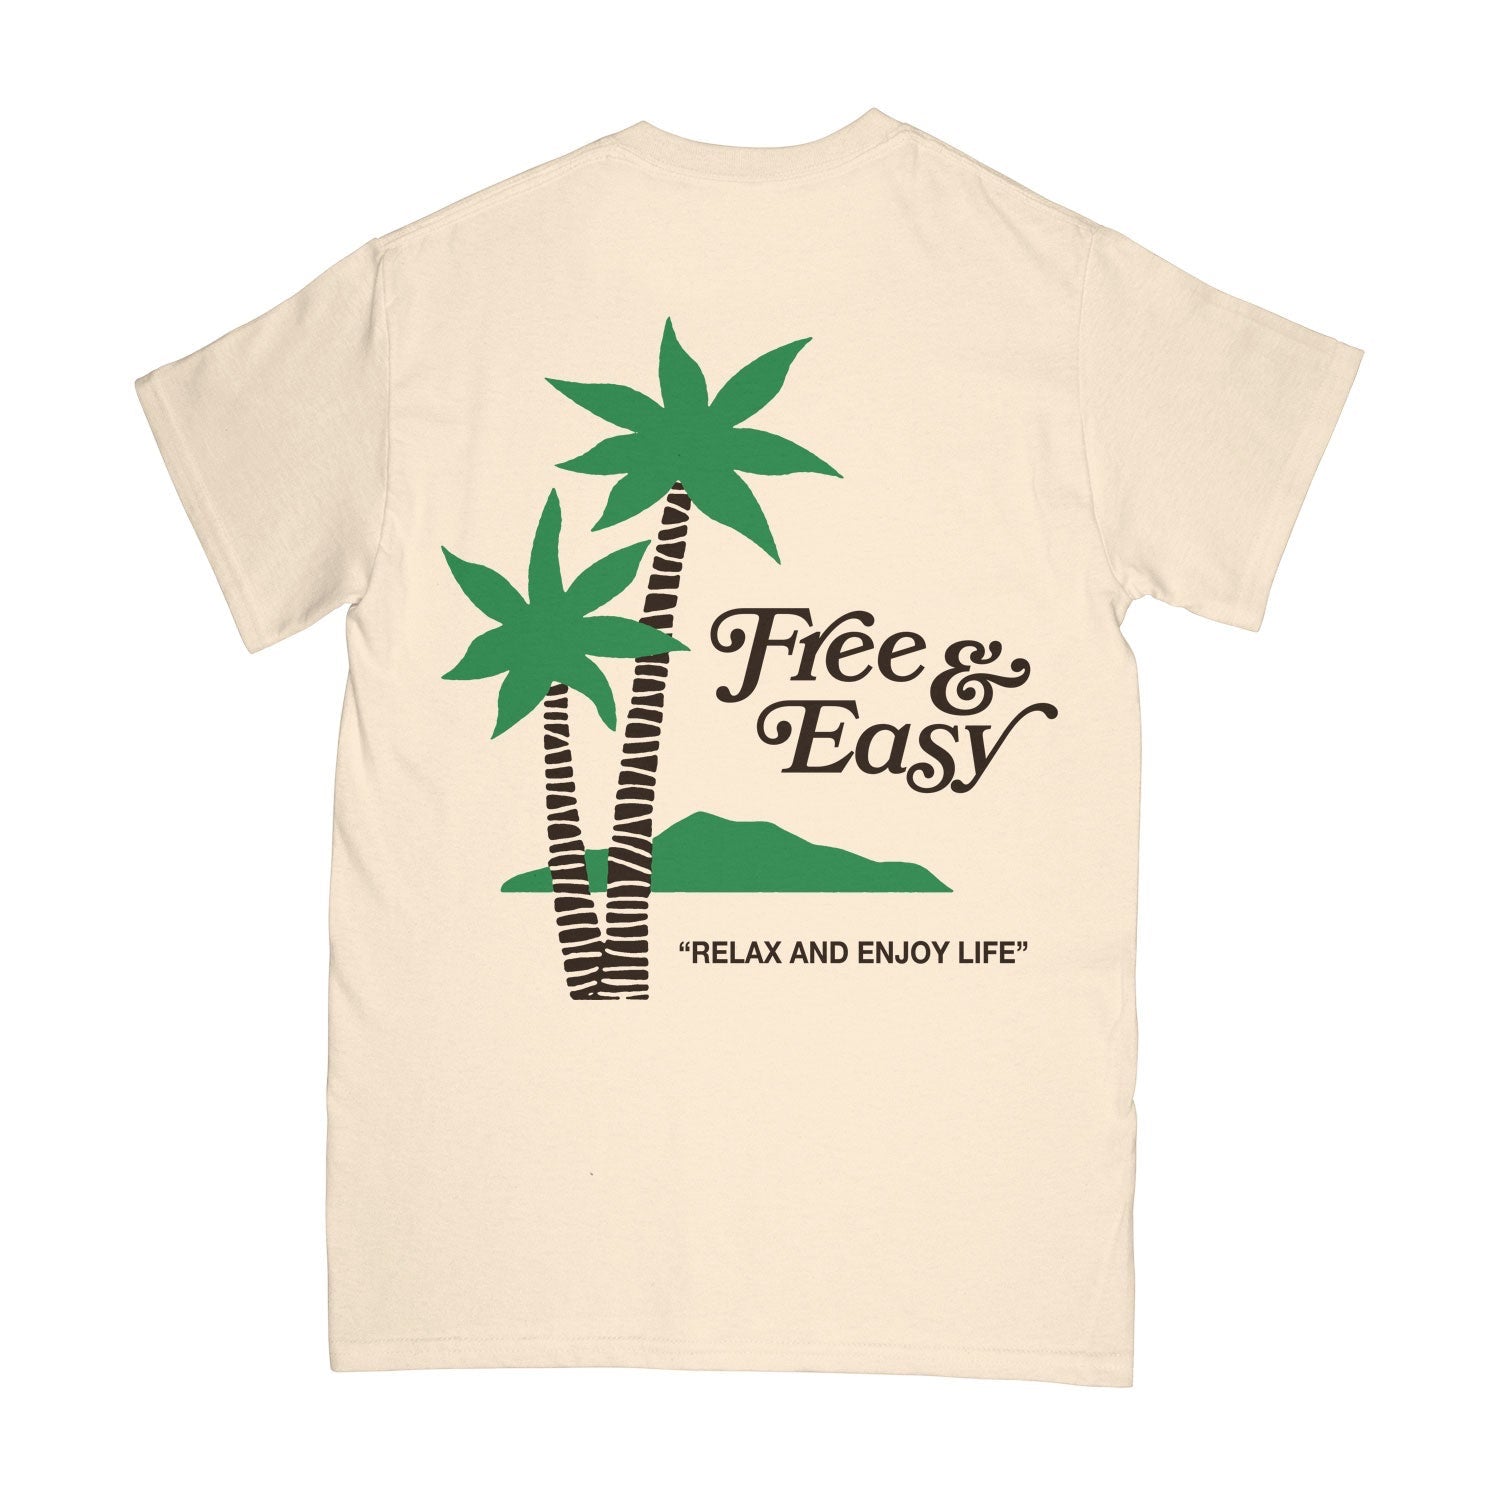 Free & Easy T-Shirt - Palm Short Sleeve Tee - Relax and Enjoy Life